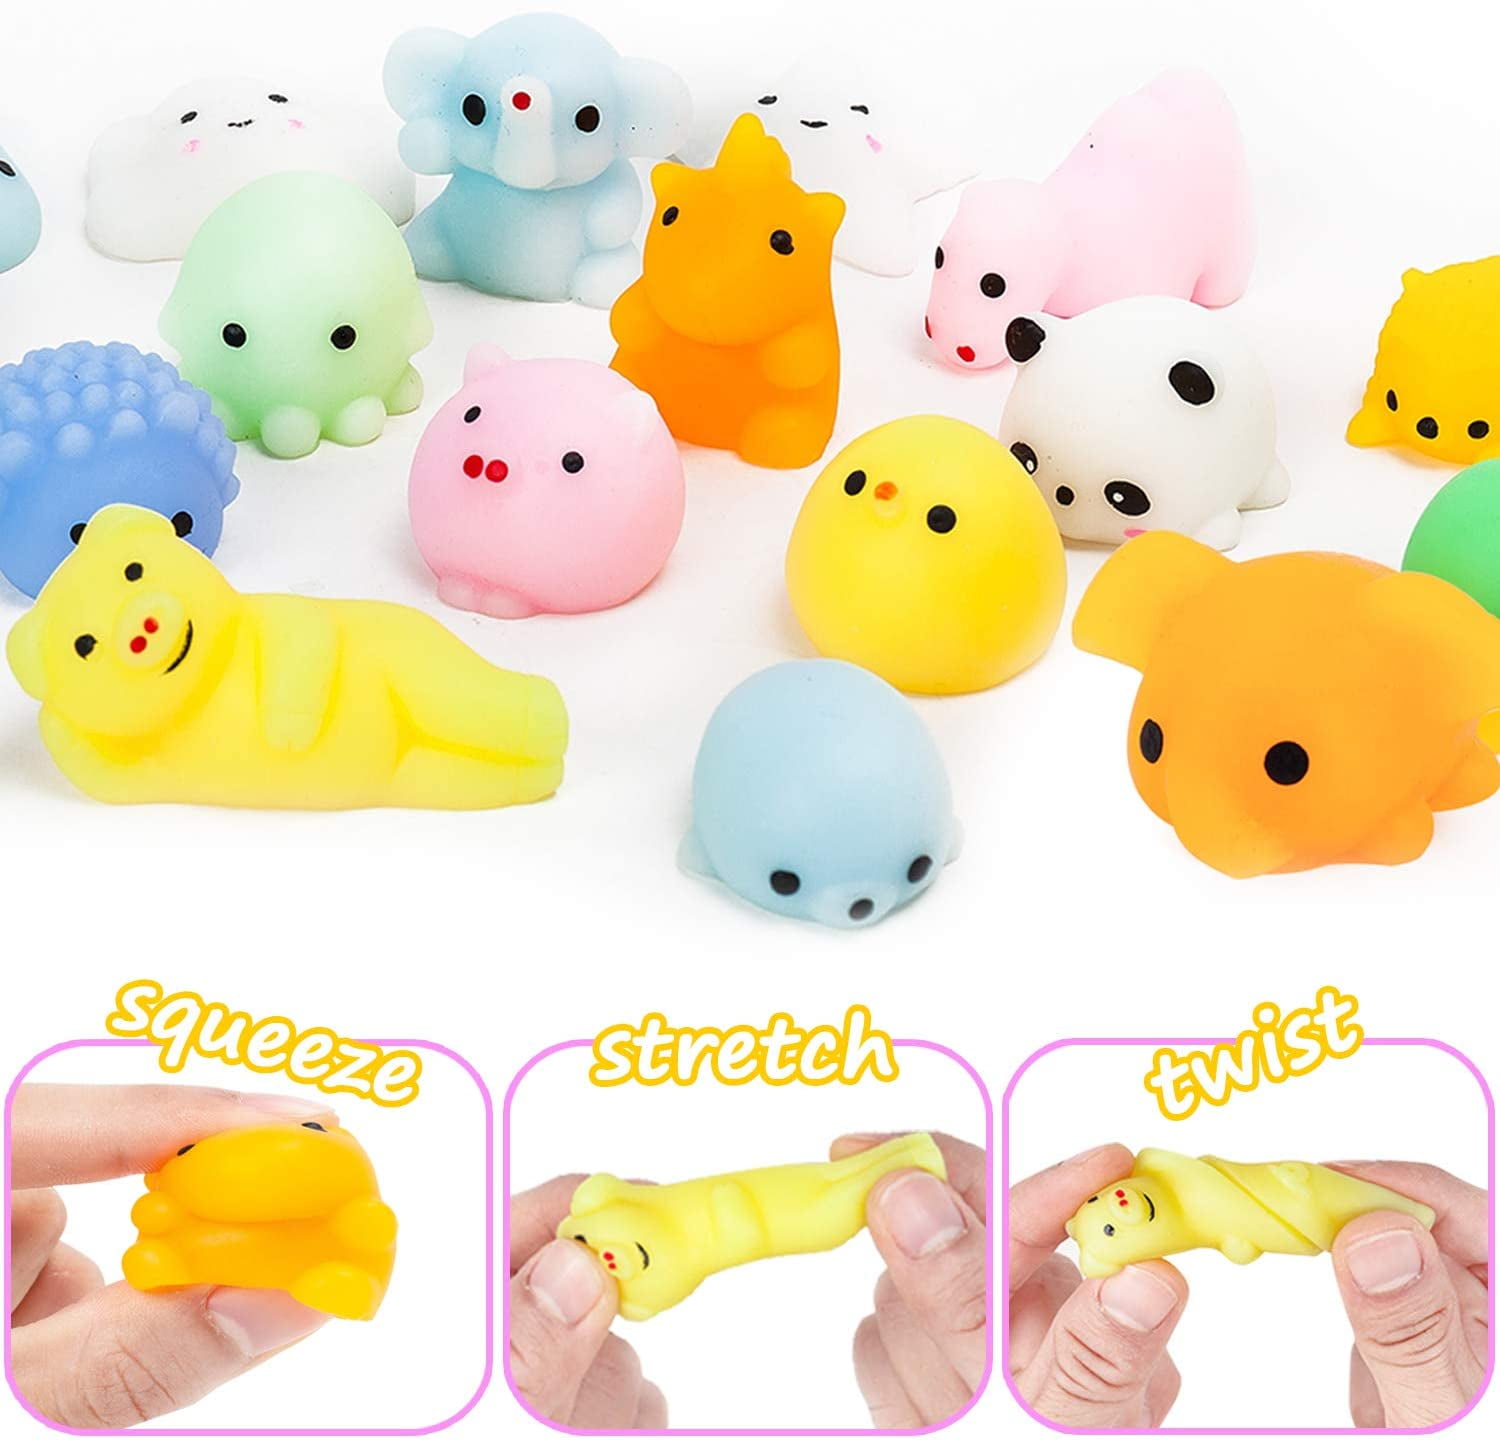 Govfrey 40pcs Mochi Squishy Toy, Mini Squishies for Kids Party Bag Fillers,  Squishy Fidget Toys， Random Quiet Critters Stress Relief Toys for Stocking